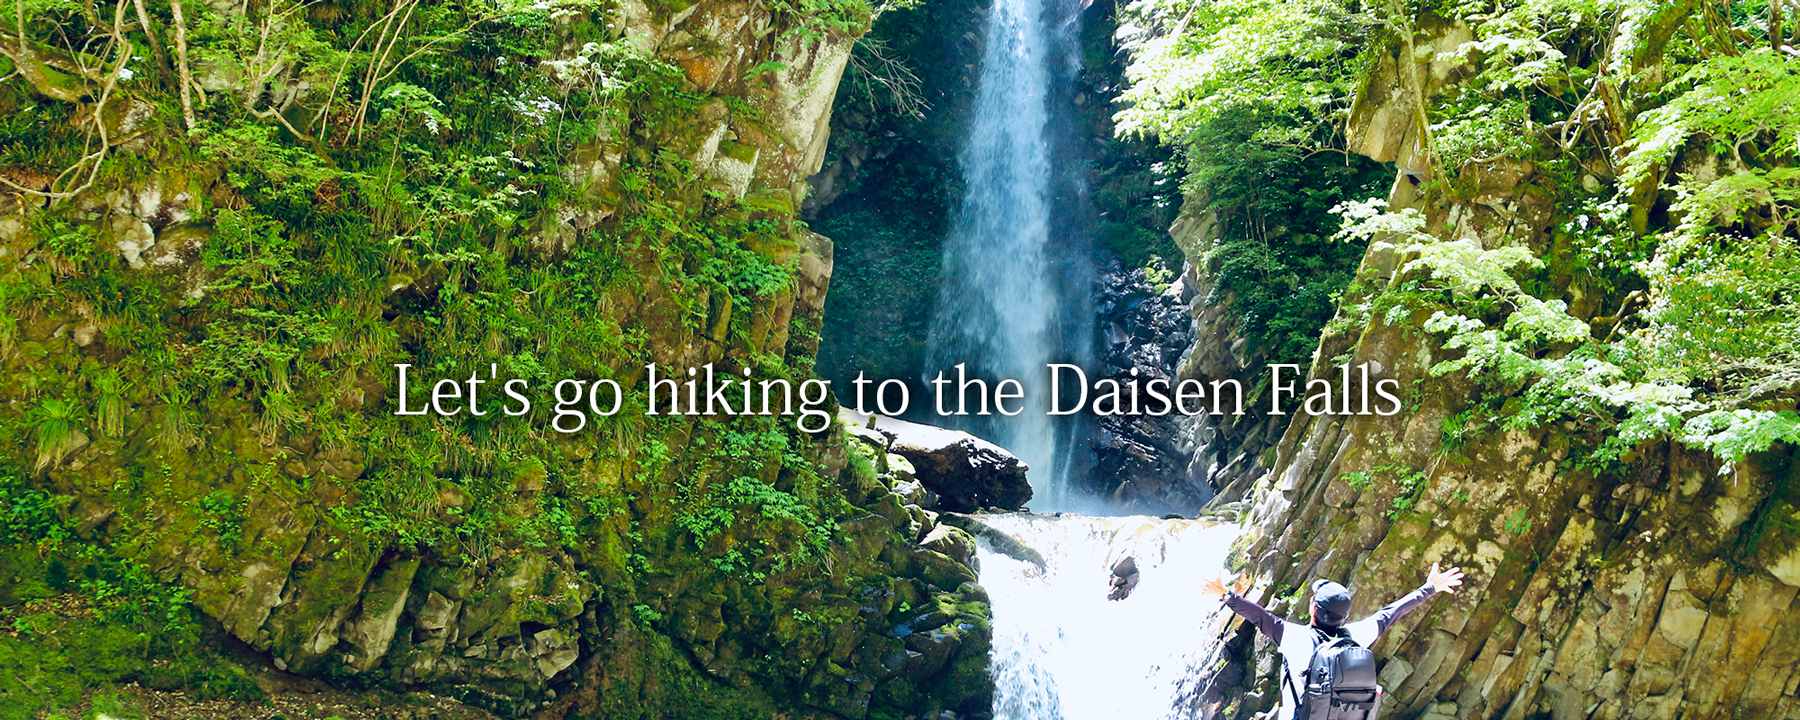 Let's go hiking to the Daisen Falls